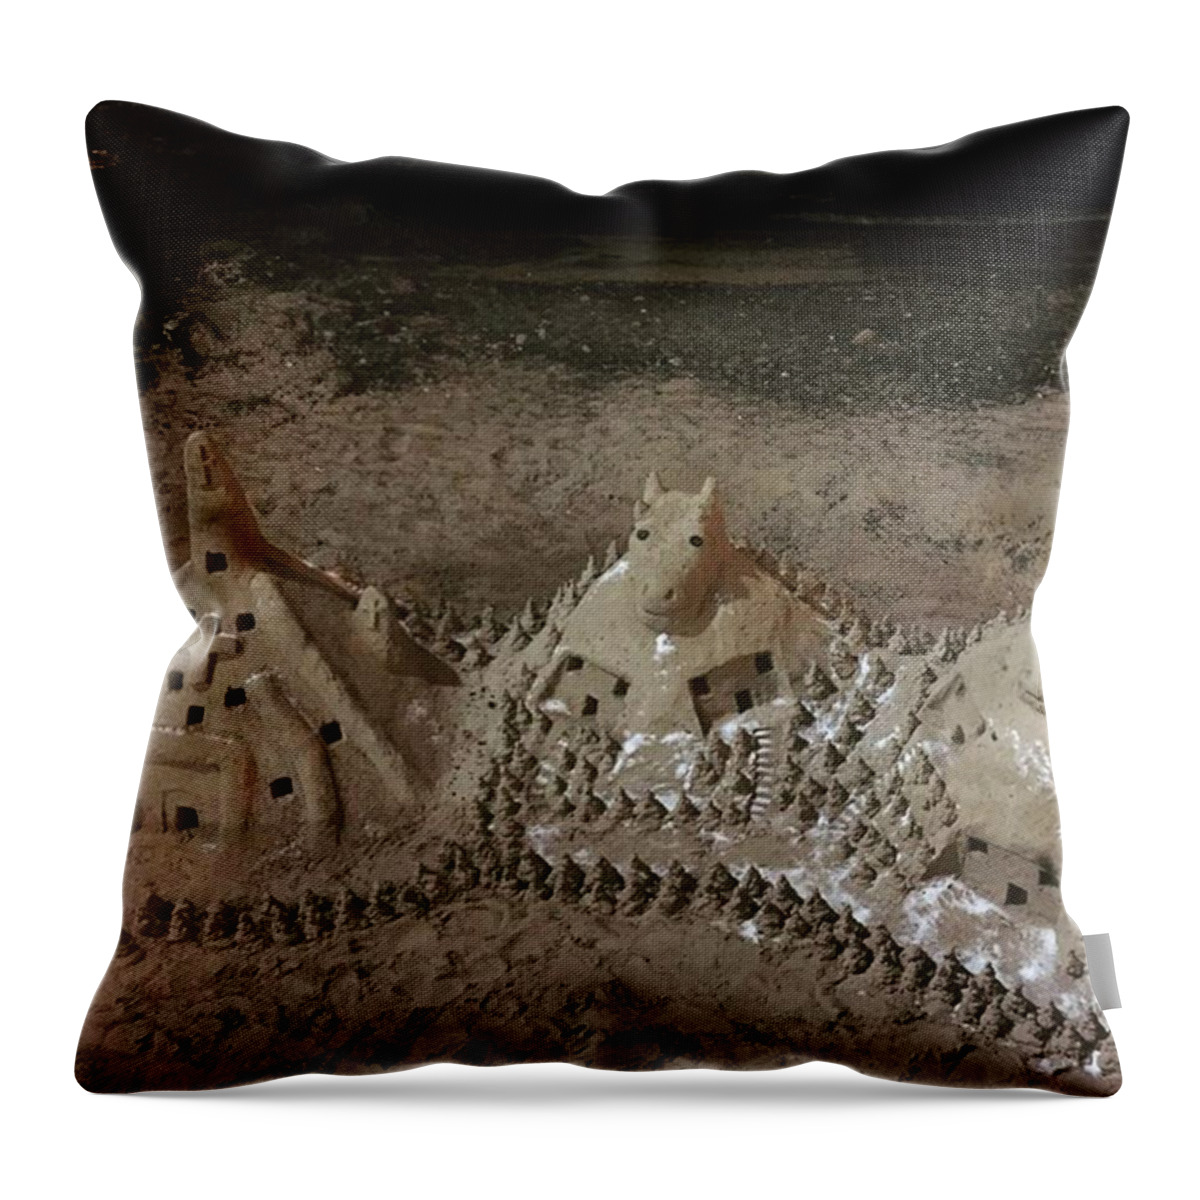 Lbloggers Throw Pillow featuring the photograph Amazing Sand Sculptures In Corralejo by Alice Megan